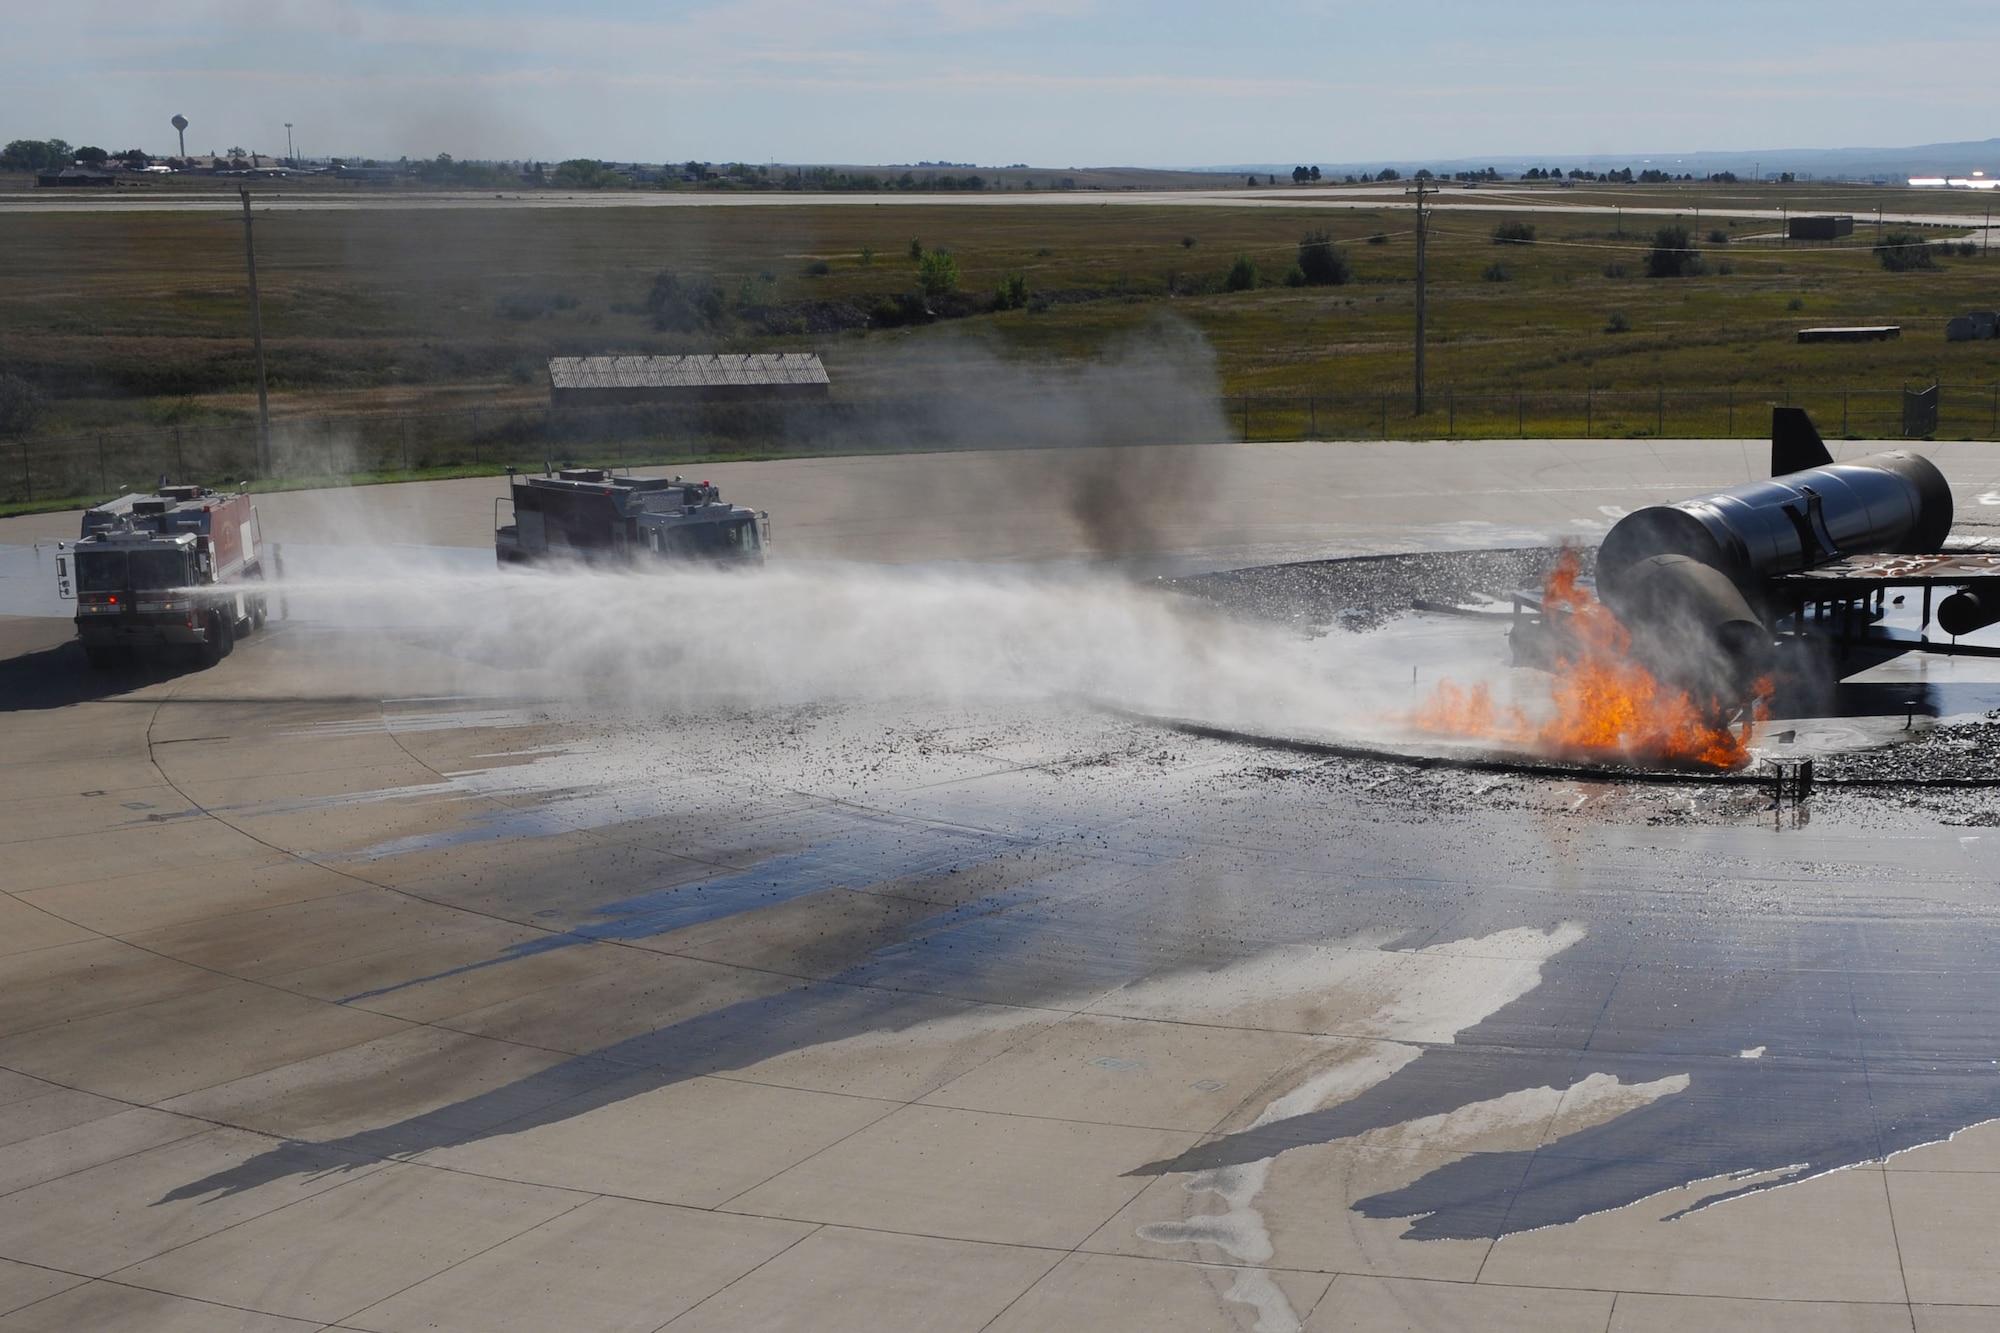 Aircraft rescue firefighting vehicles extinguish a simulated aircraft fire during a pit burn training exercise at Ellsworth Air Force Base, S.D., Sept. 18, 2013. ARF vehicles can hold up to3,300 gallons of water and the torrets are capable of releasing 250 gallons a minute. (U.S. Air Force photo by Airman 1st Class Rebecca Imwalle / Released)